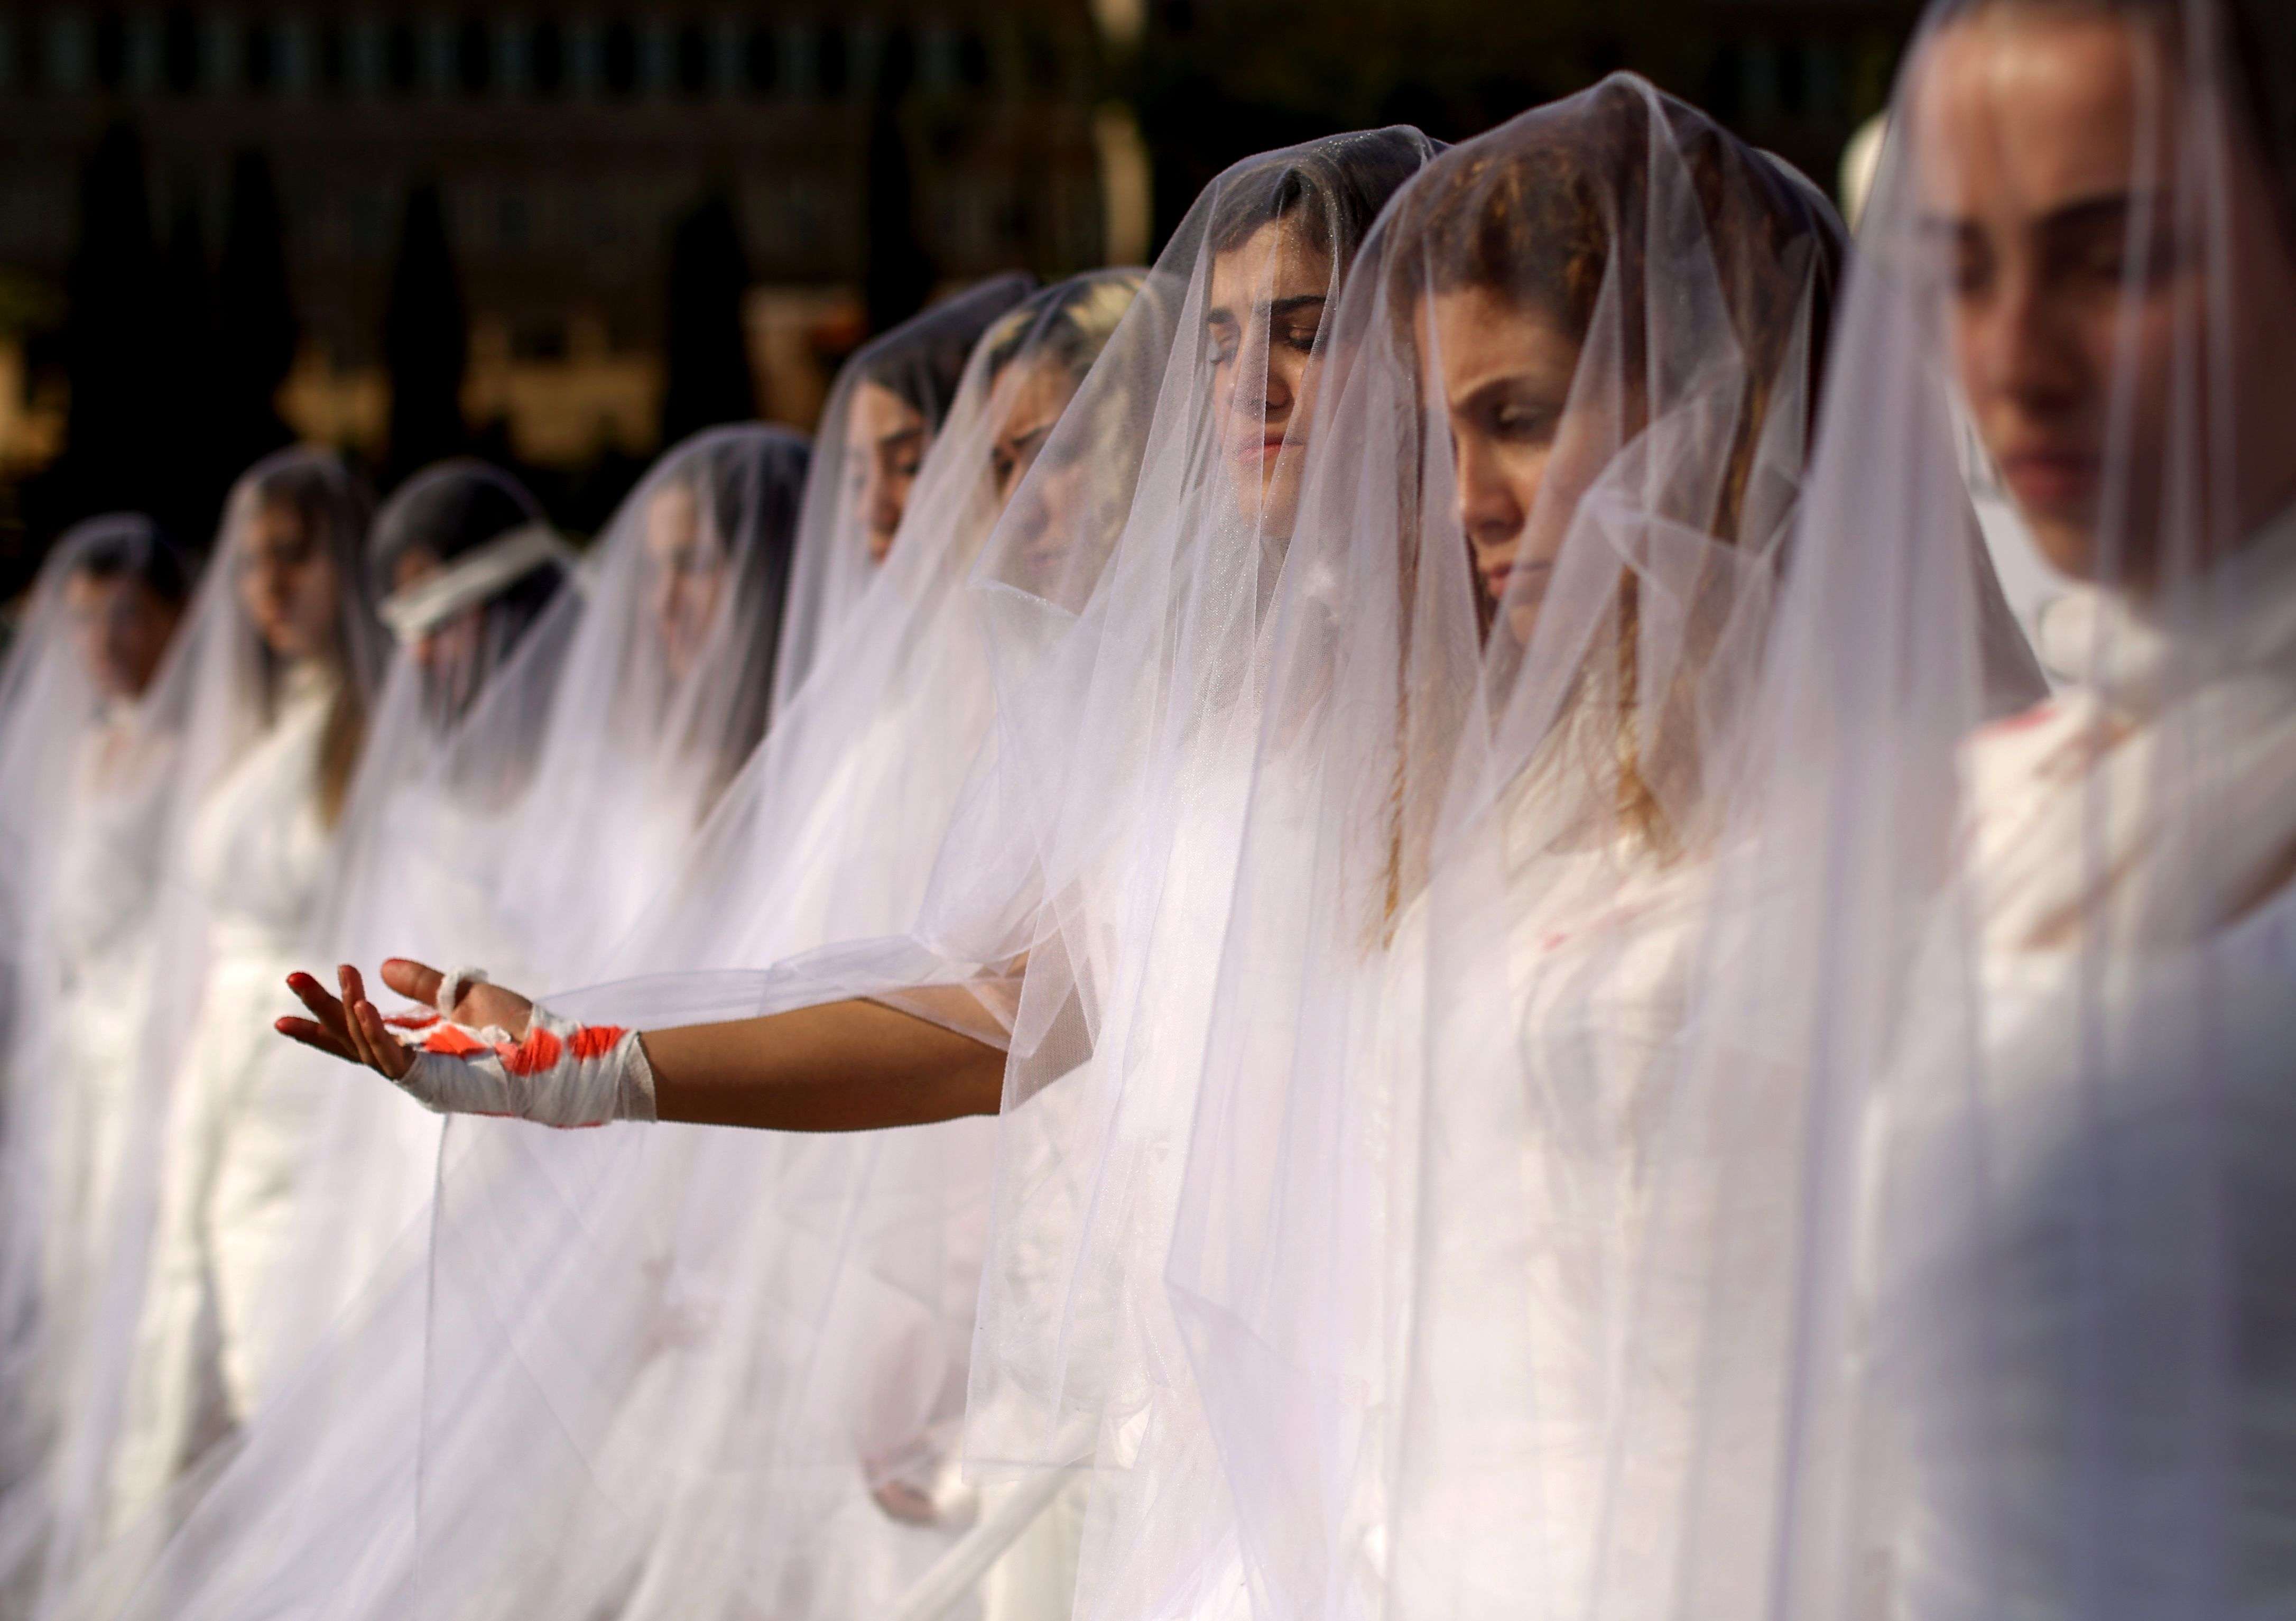 Activists from a Lebanese NGO dress as injured brides in downtown Beirut this month. They were protesting against a law that shields rapists from prosecution on the condition that they marry their victim. Photo: AFP